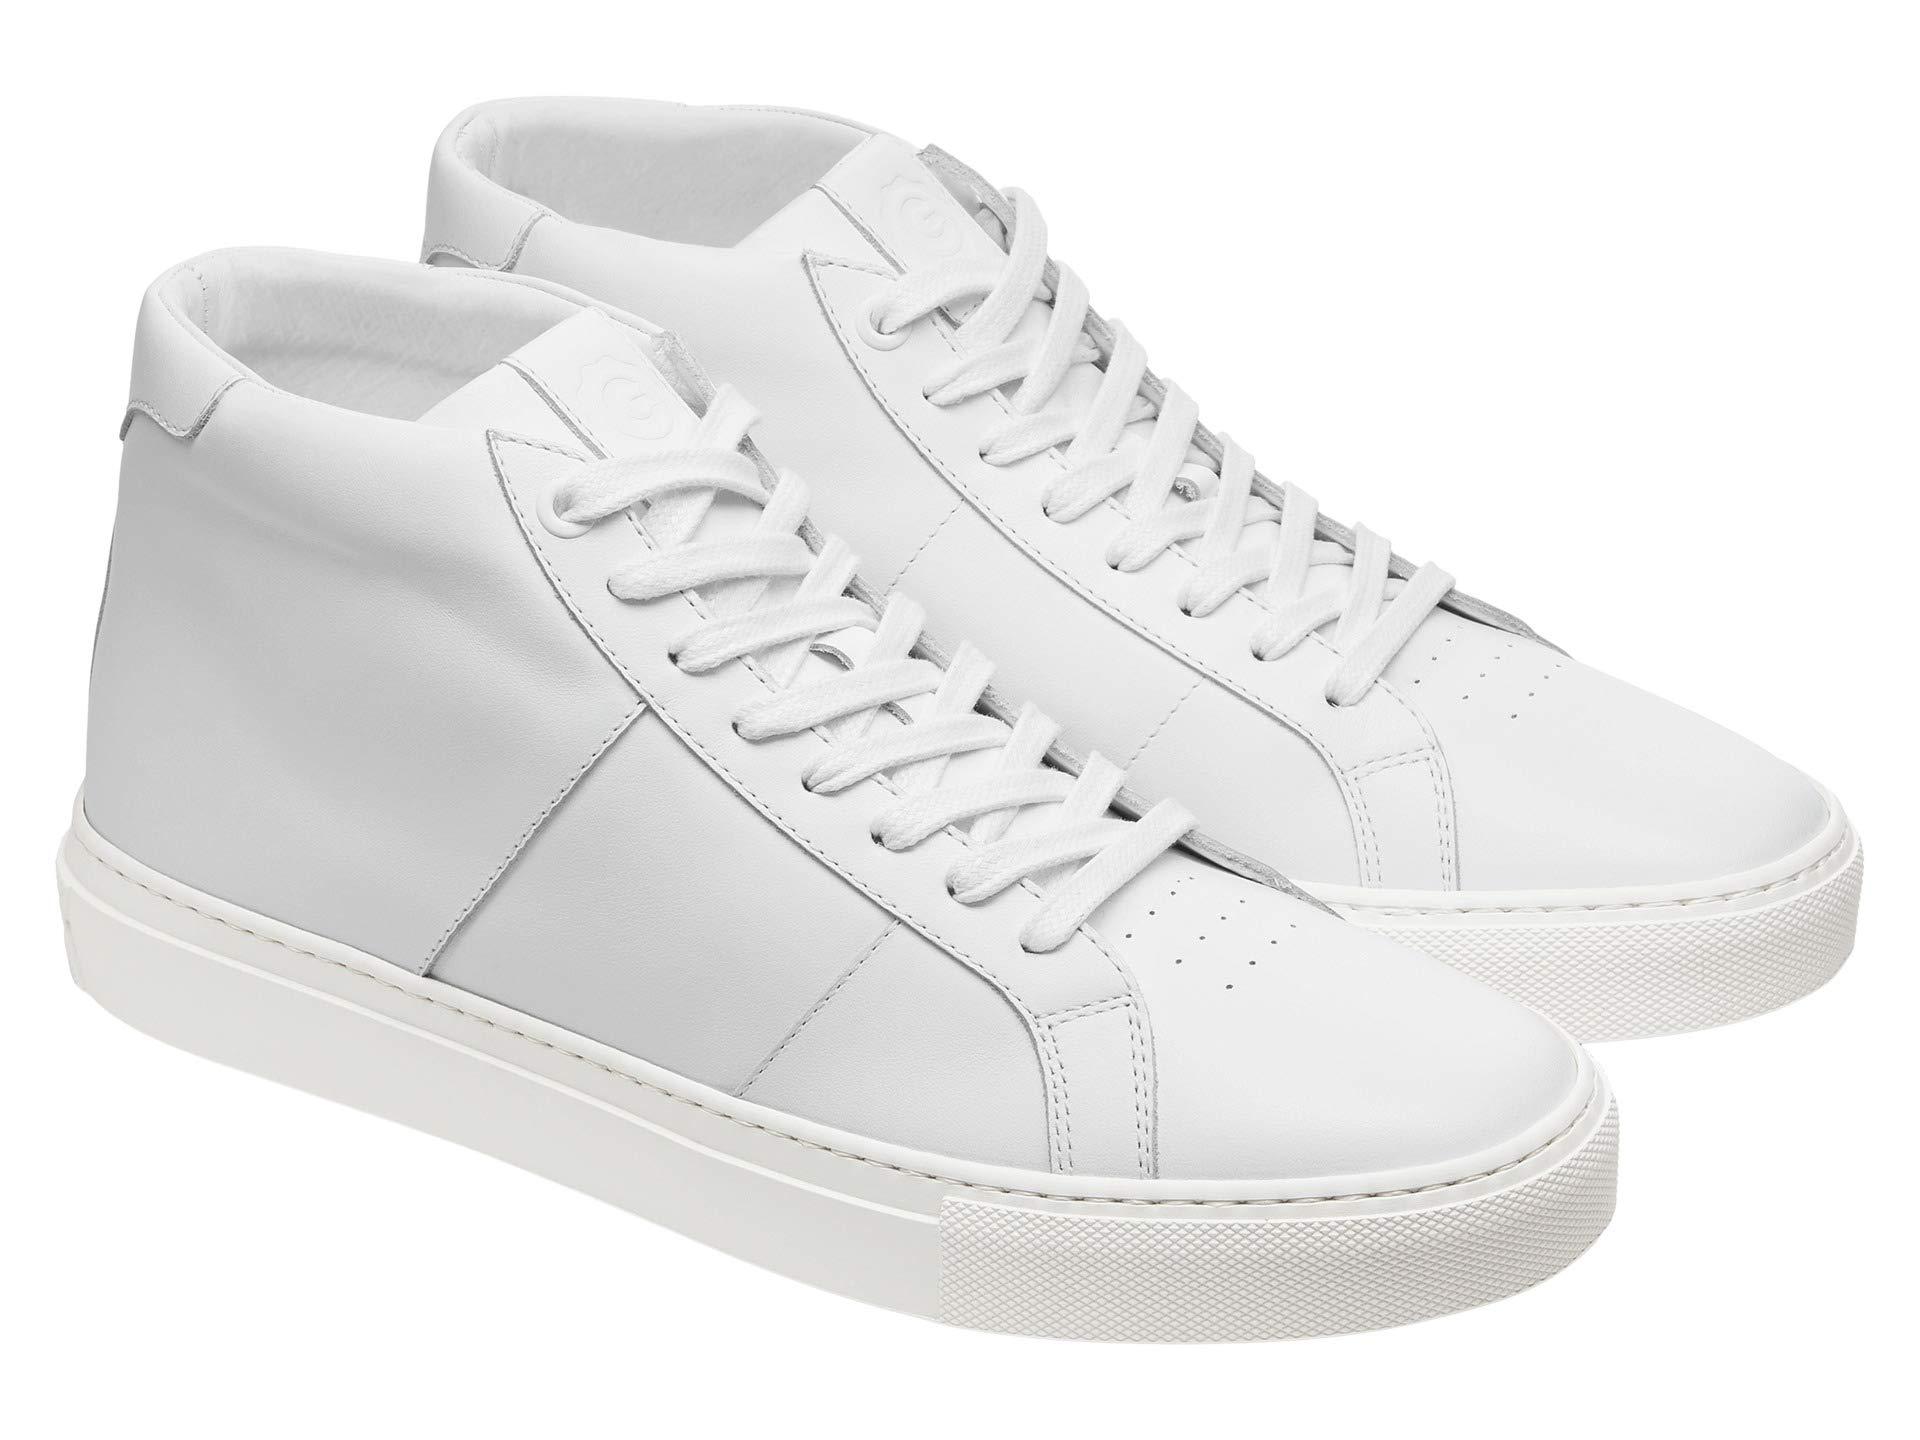 GREATS Leather Royale High in White for Men - Lyst